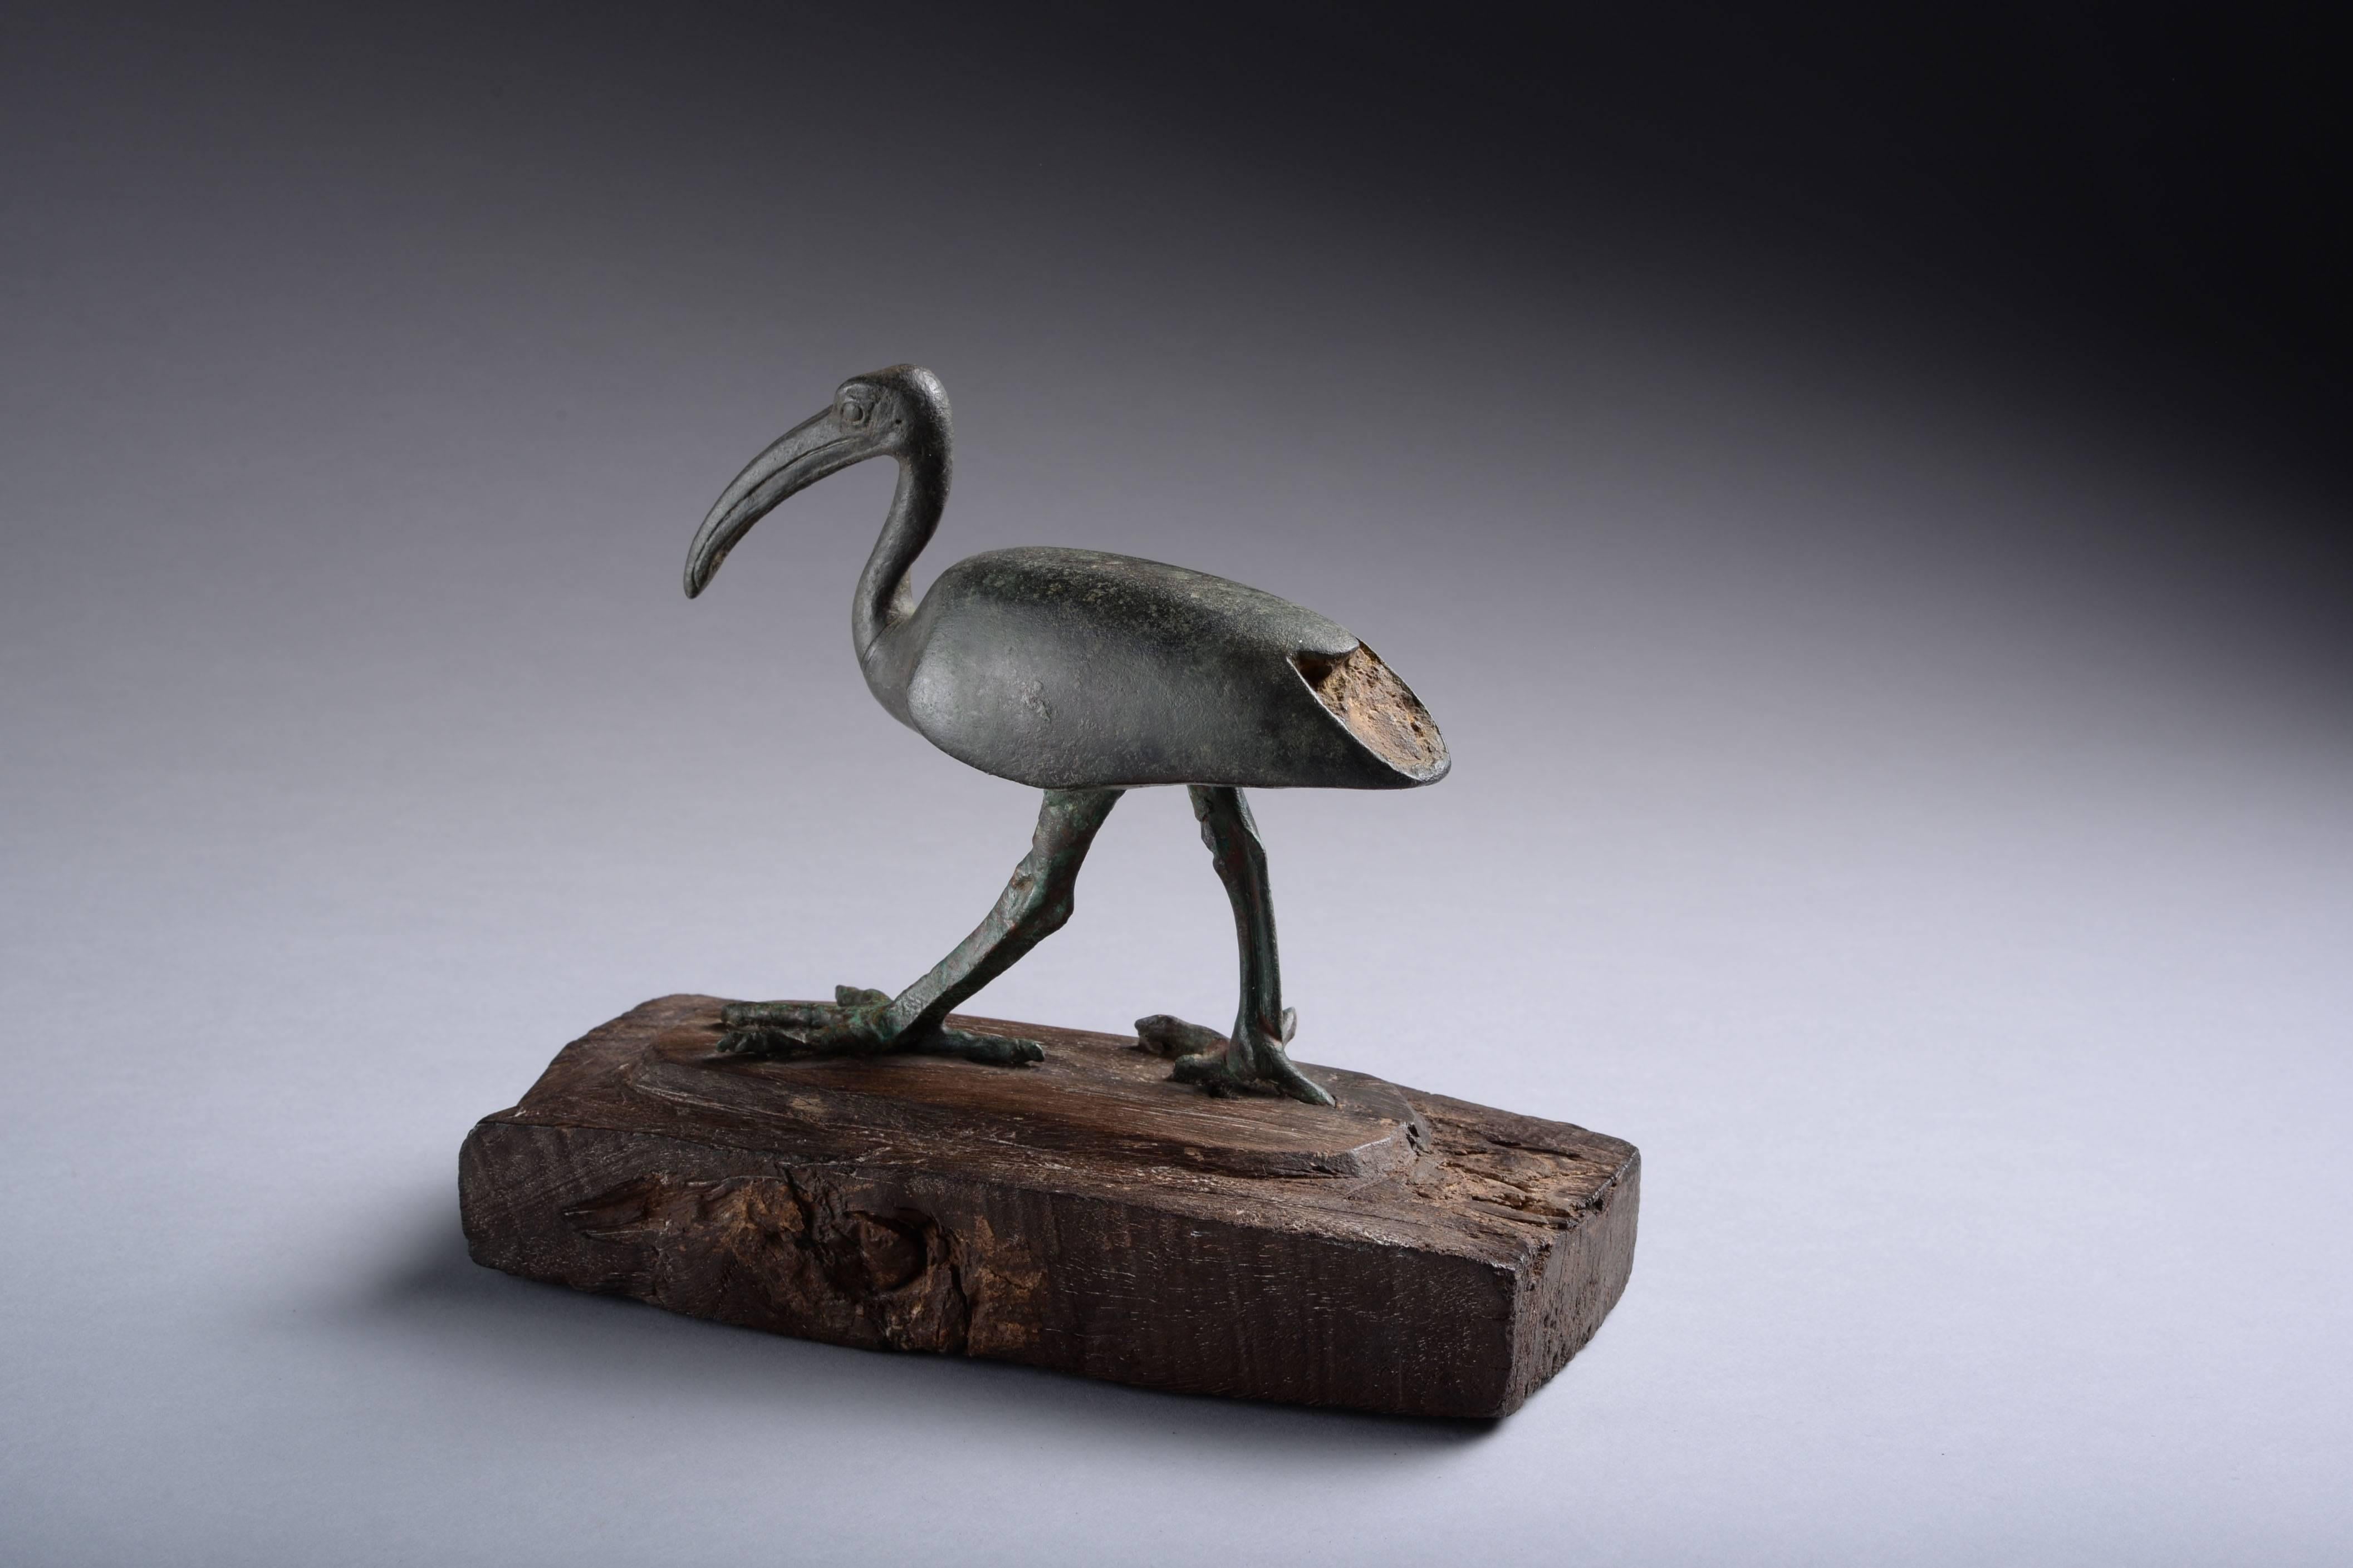 An Egyptian bronze figure of an Ibis, dating to the Late Period, circa 664-332 BC. 

Modelled with left leg forward, the creature's distinctive bald head raised, its curved beak pointing at the ground, its wings neatly folded. Standing on a wooden